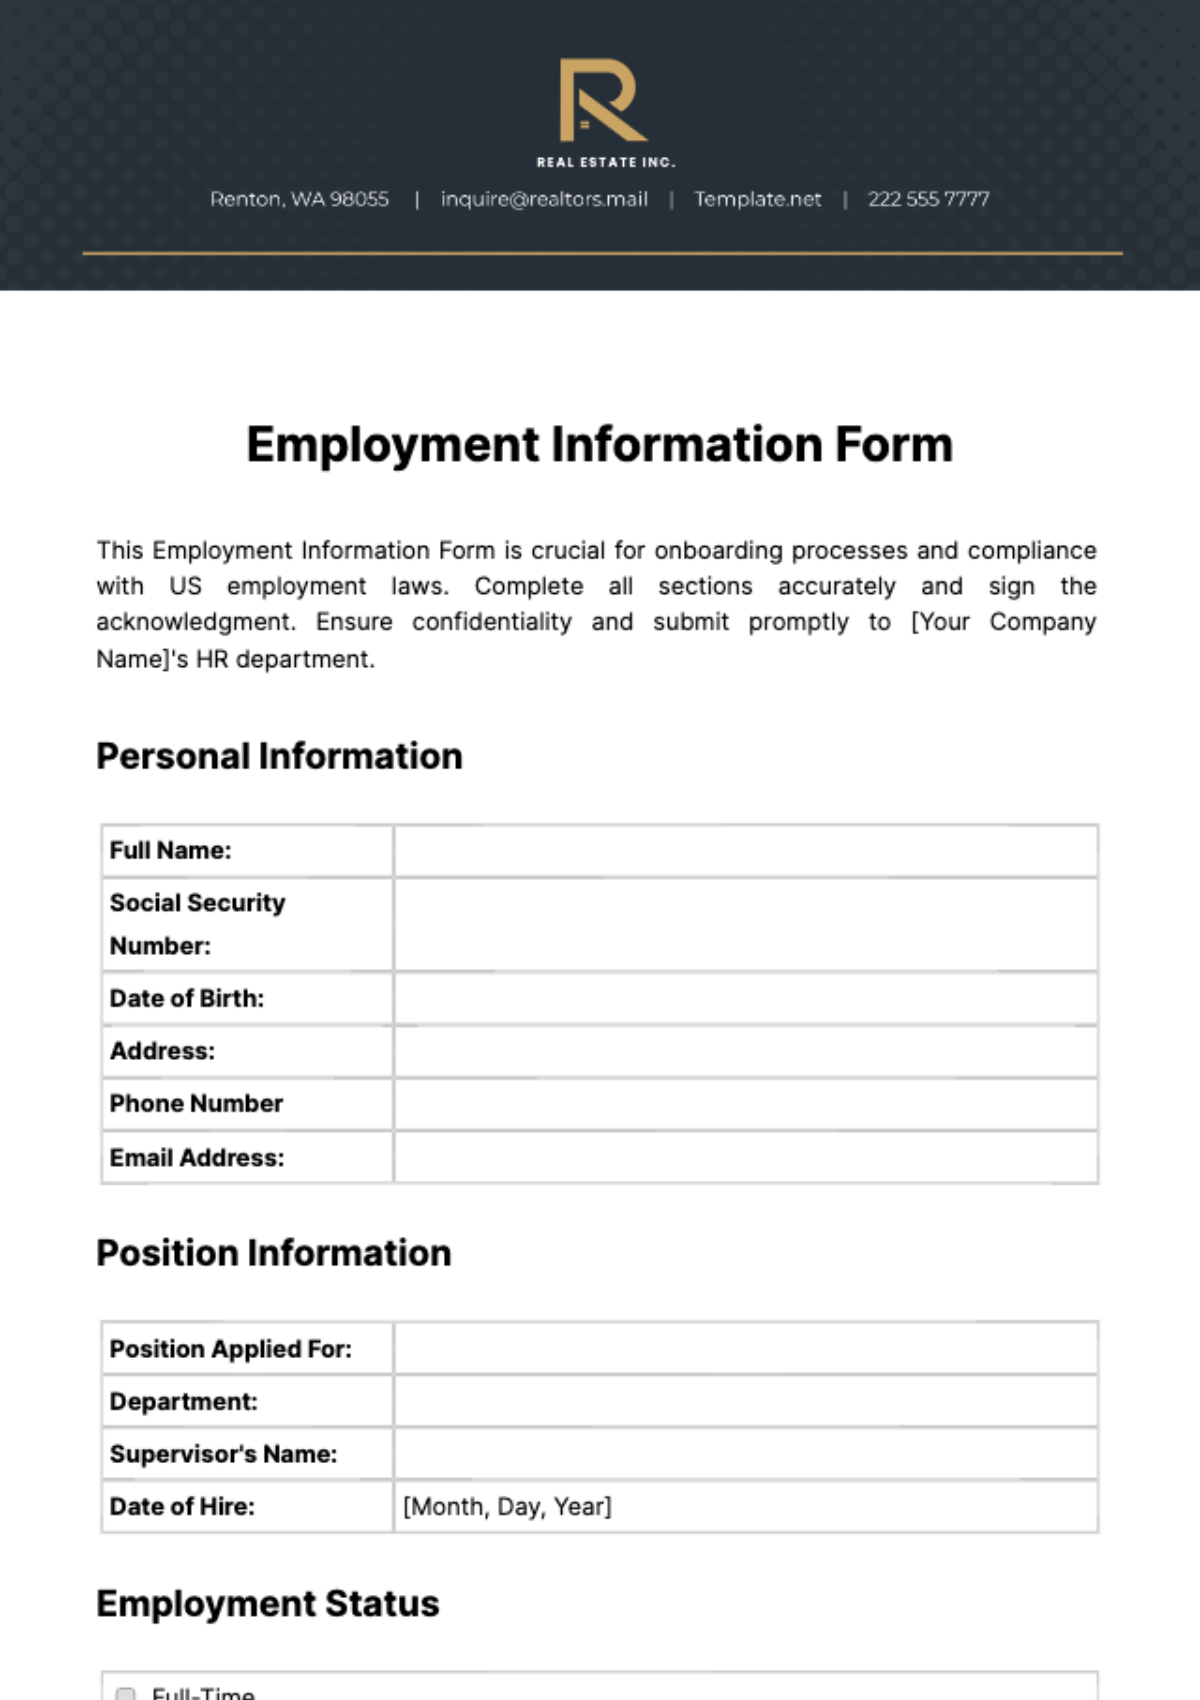 Real Estate Employment Information Form Template